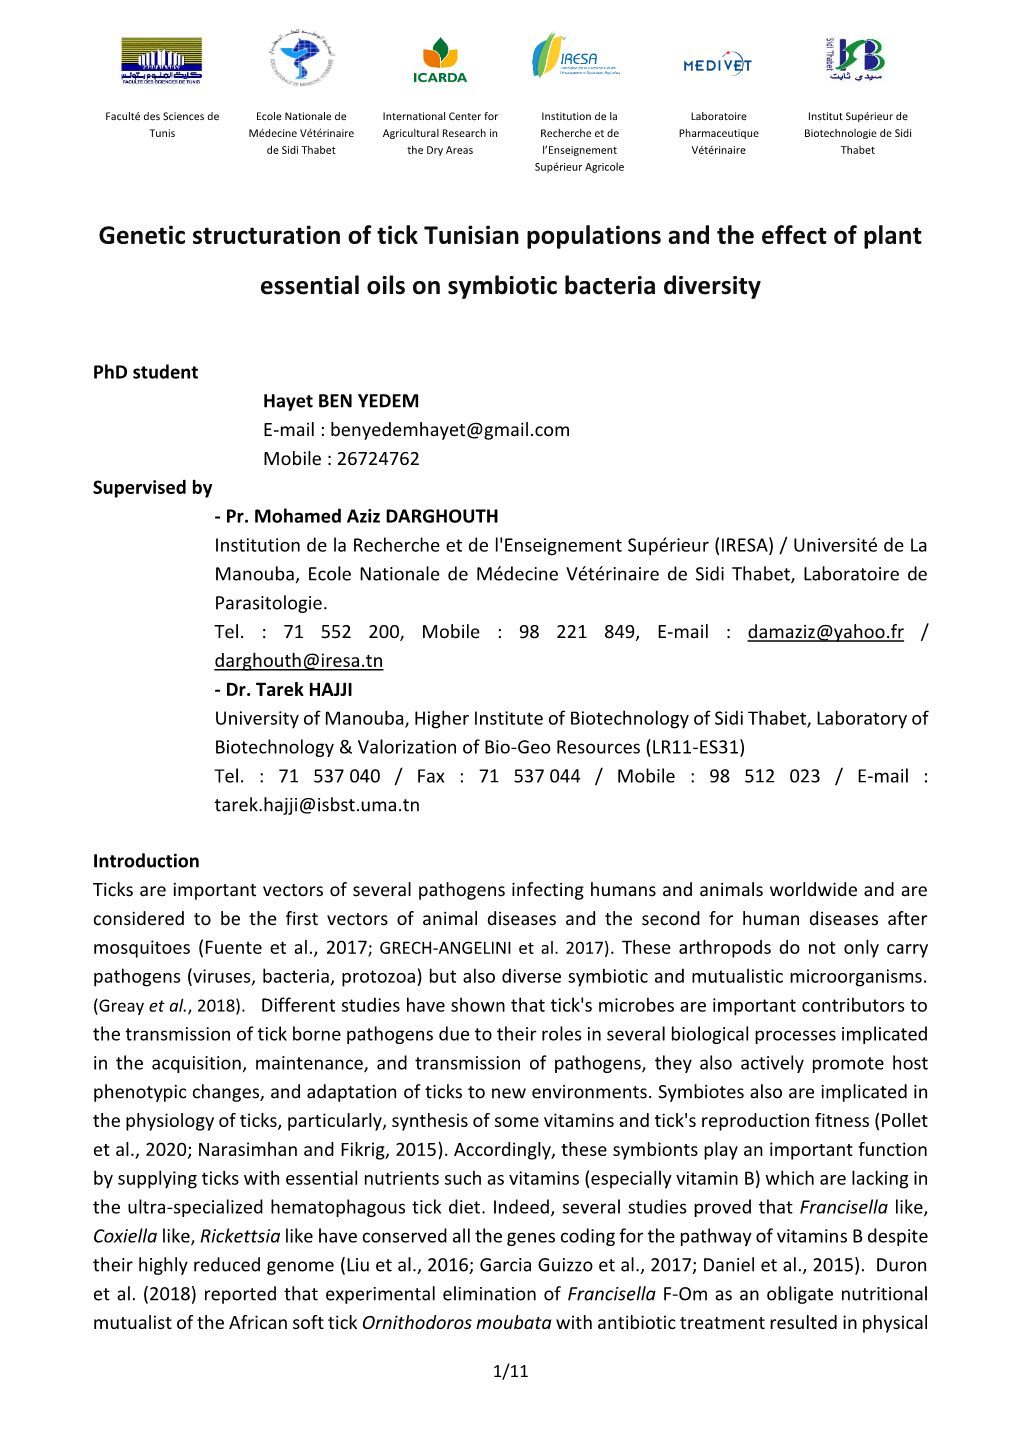 Genetic Structuration of Tick Tunisian Populations and the Effect of Plant Essential Oils on Symbiotic Bacteria Diversity